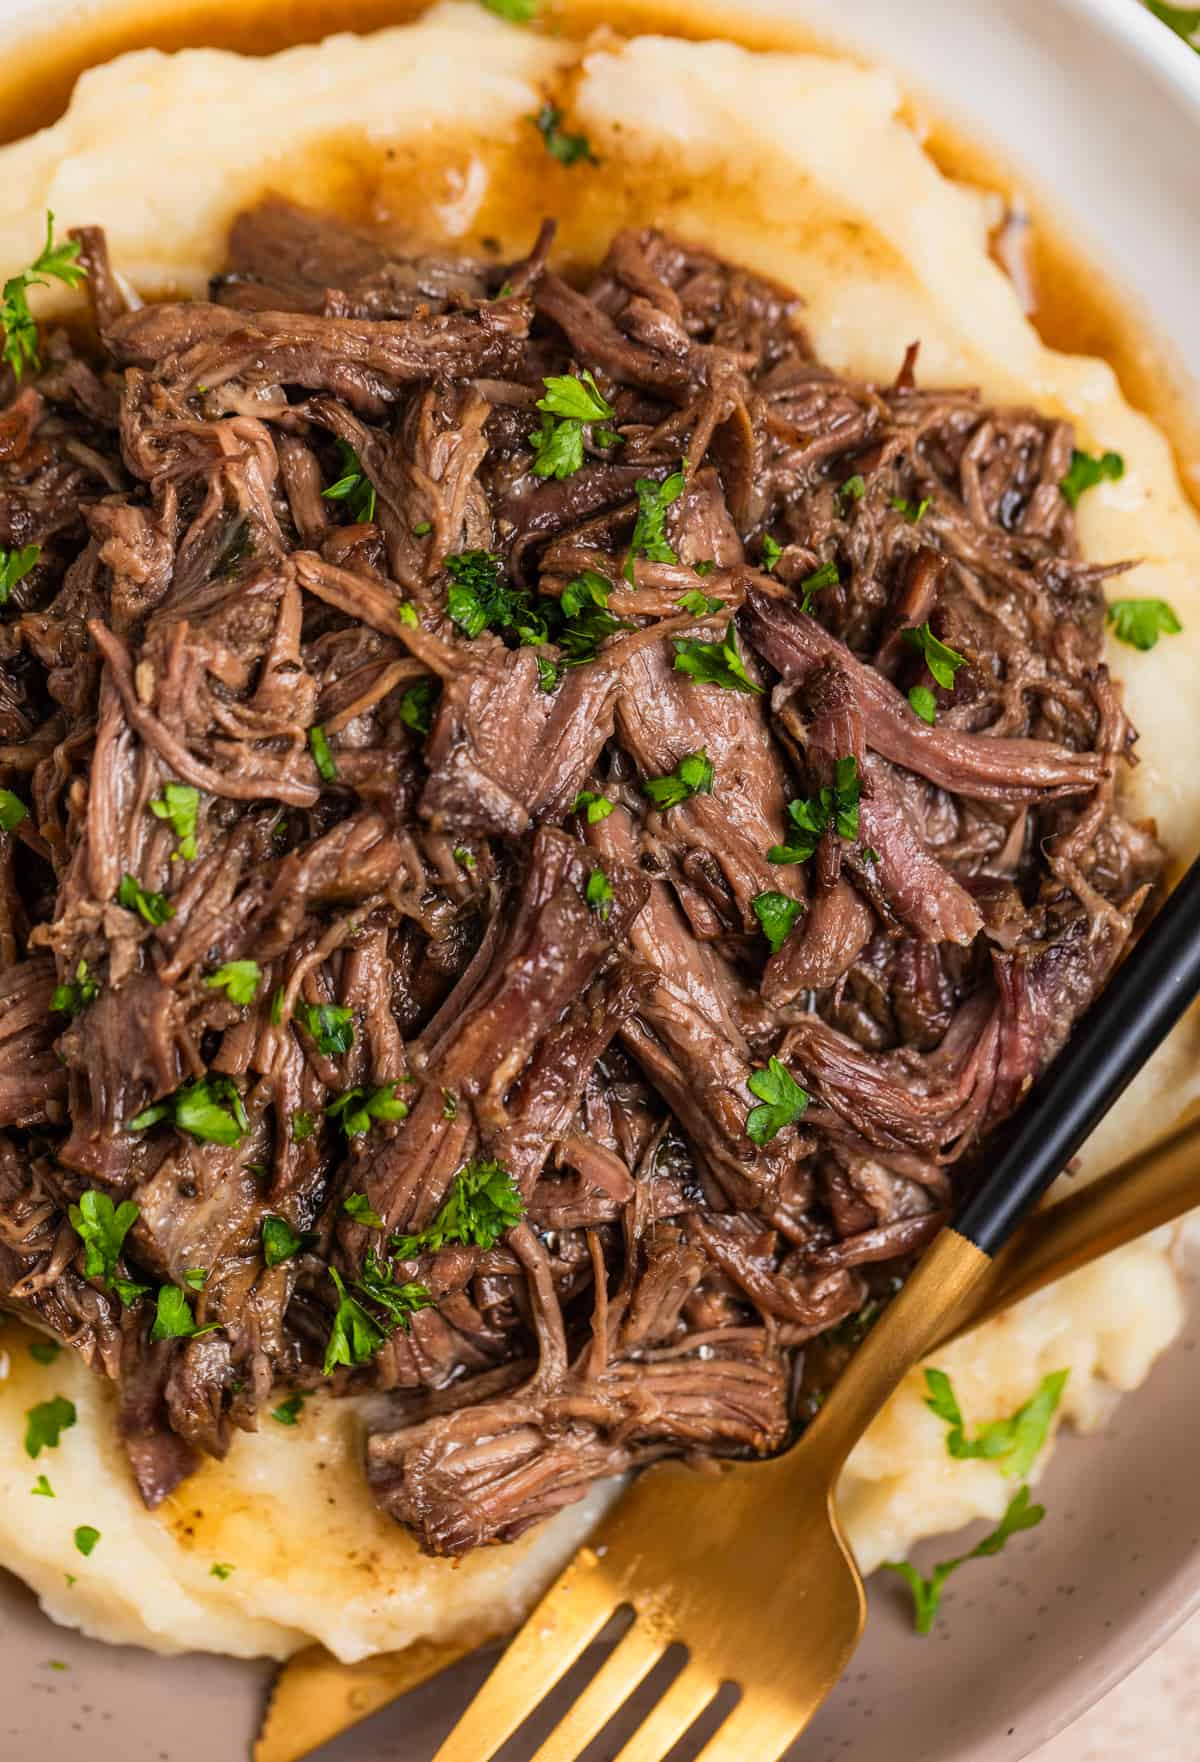 Overhead view of plate with pulled beef in juices over mashed potatoes and topped with chopped herbs.